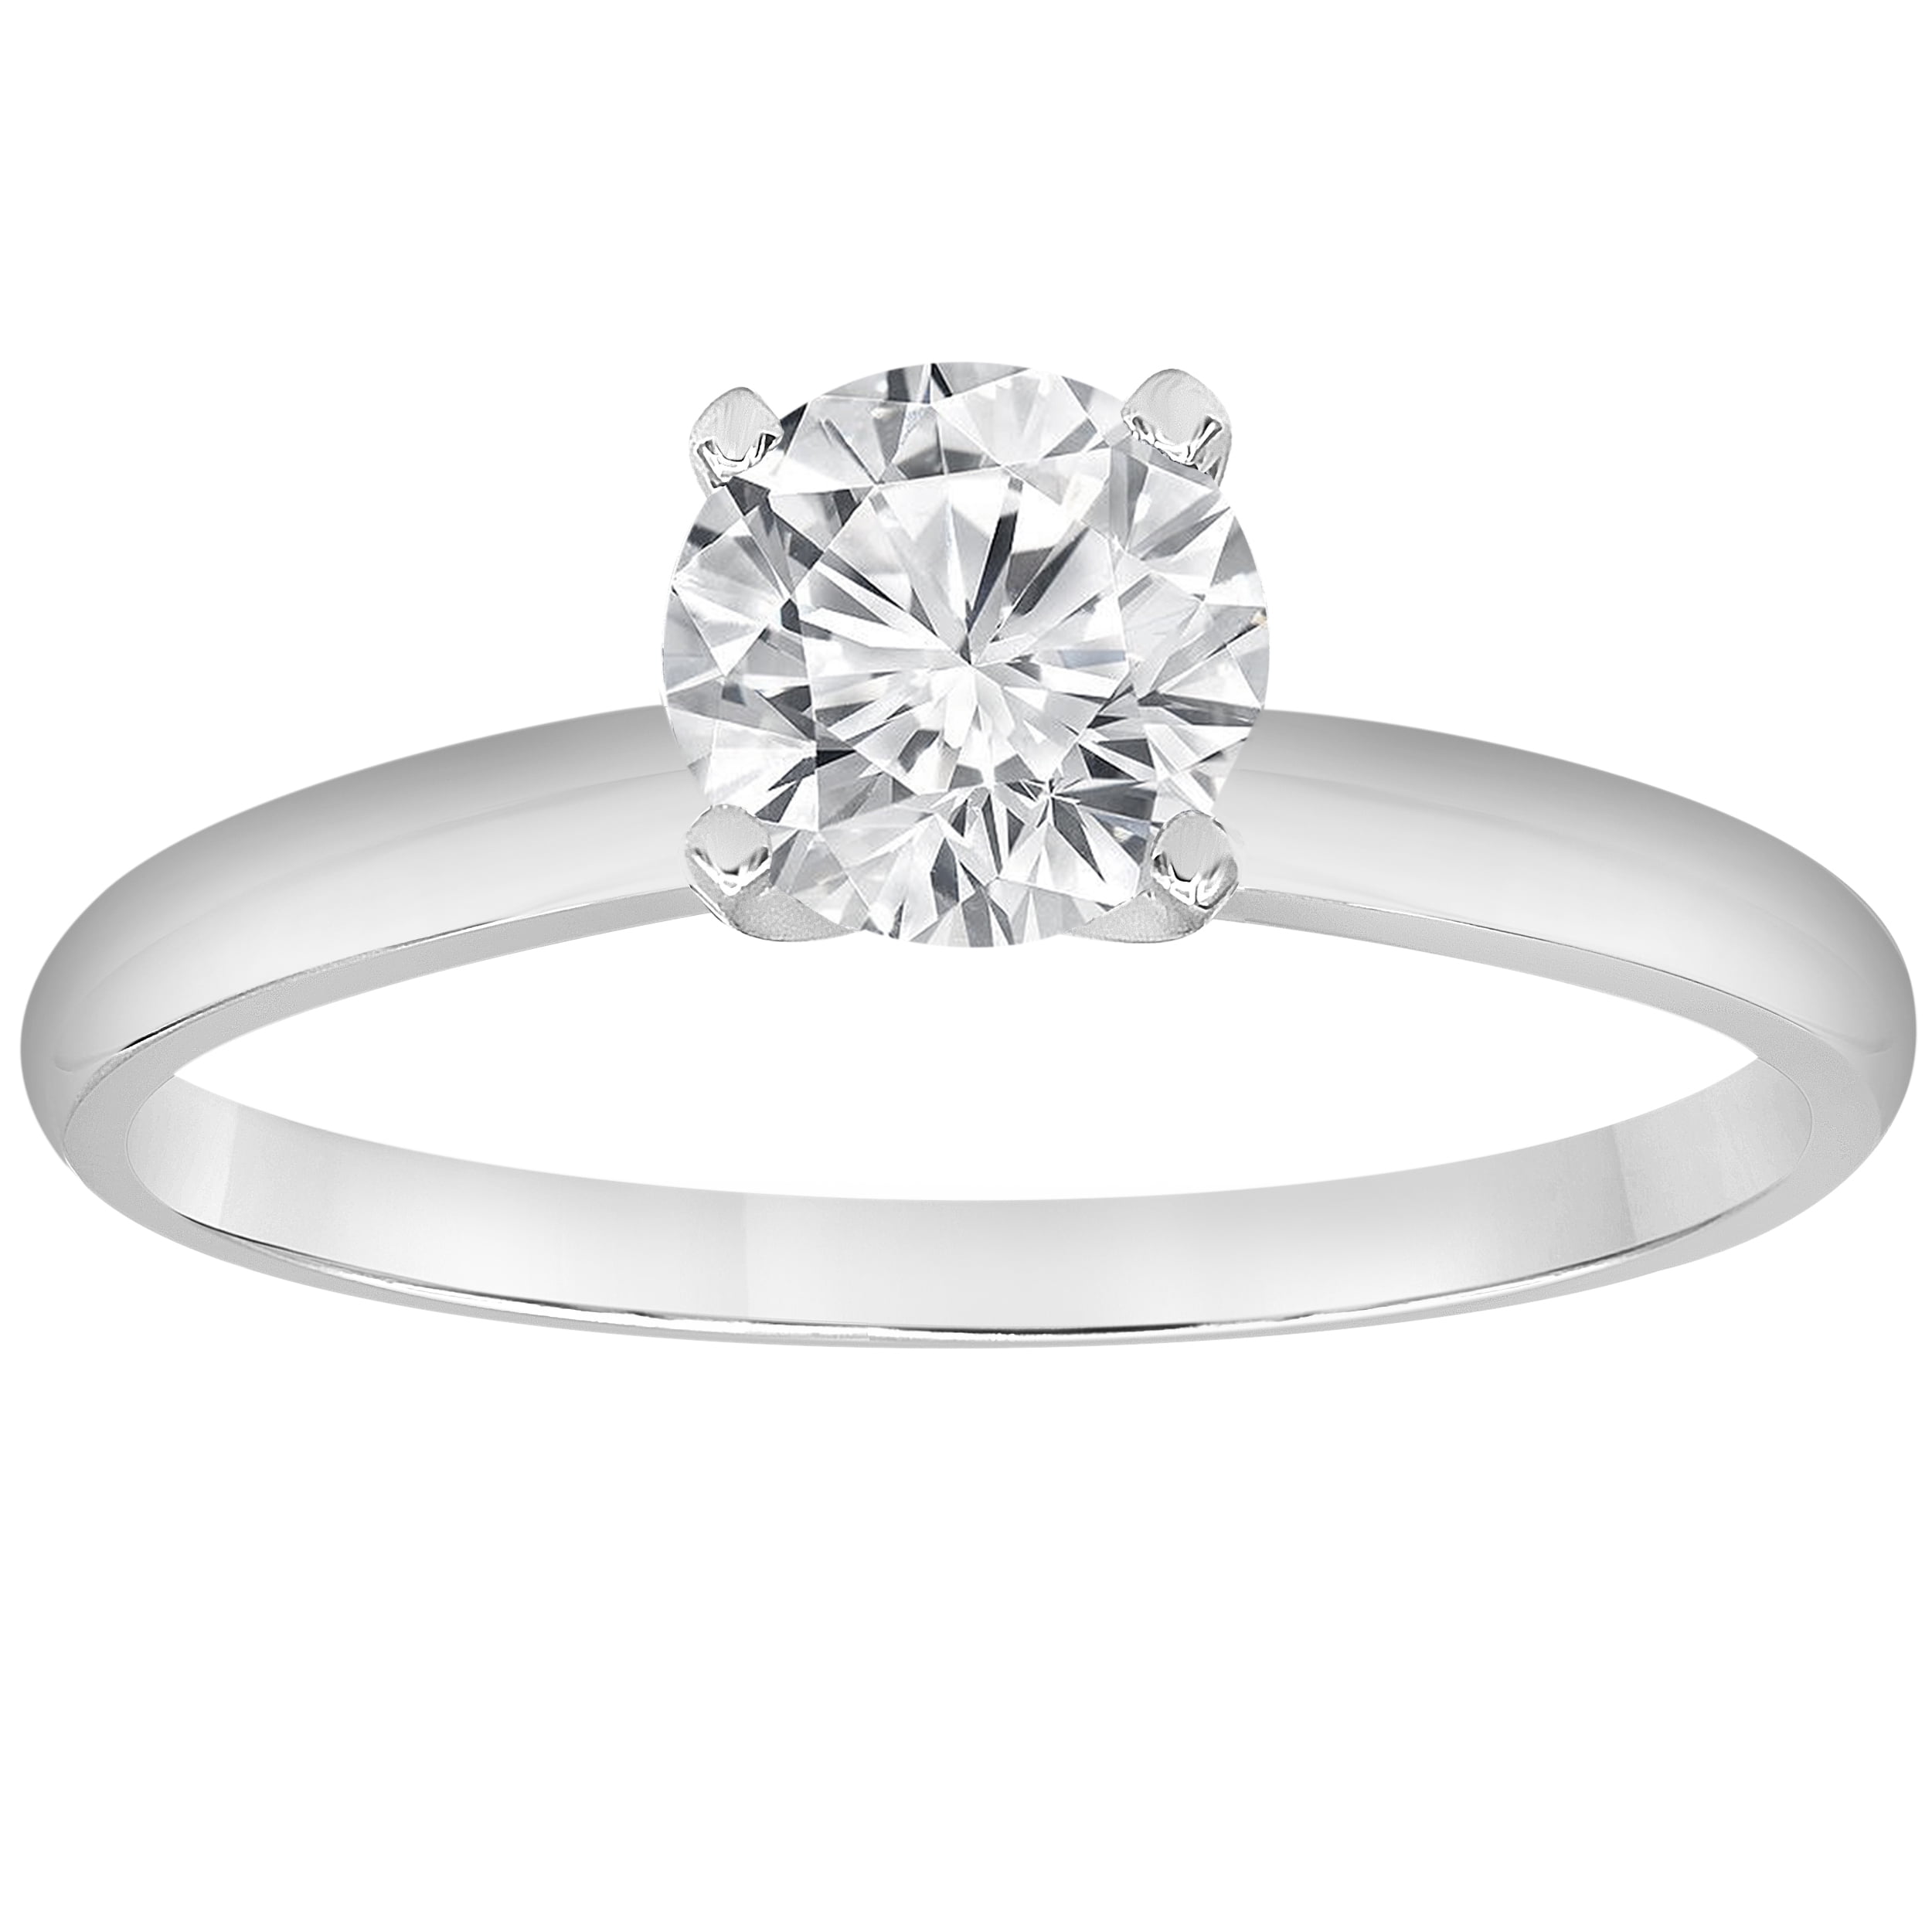 Womens Cute 1.0 CT ROUND CUT Engagement Promise RING White Gold Plated SIZE 5-9 